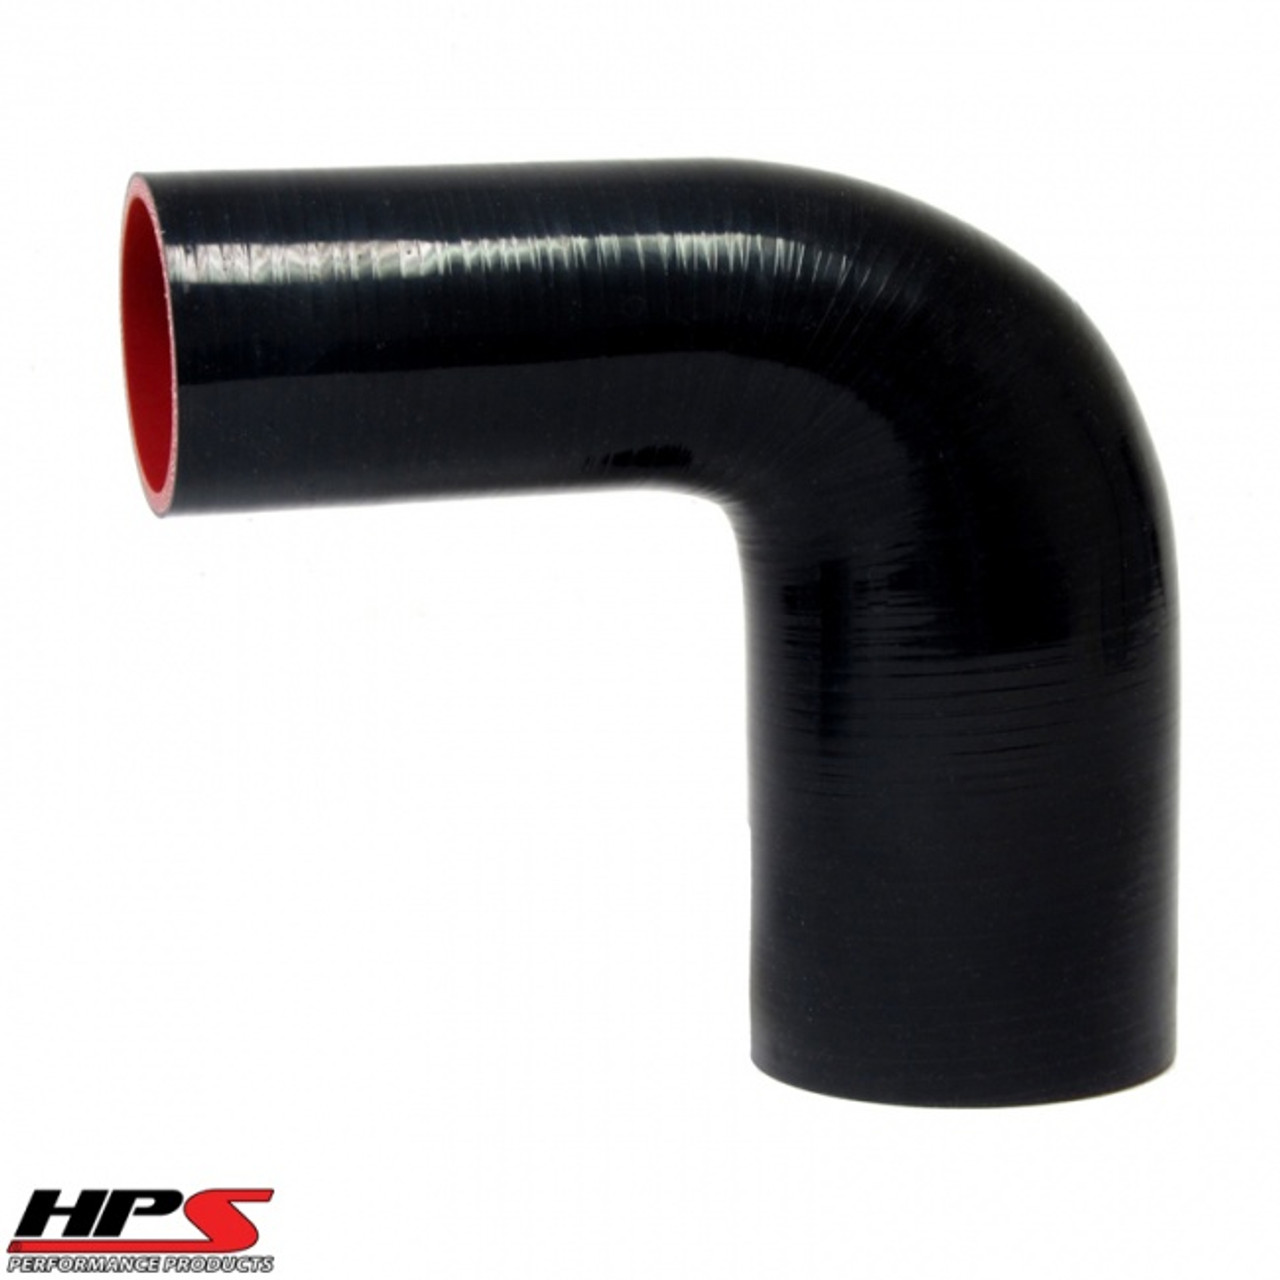 HPS 4 Ply Reinforced 90 Degree Silicone Hose Adapter 2.50" x 3" ID - Black